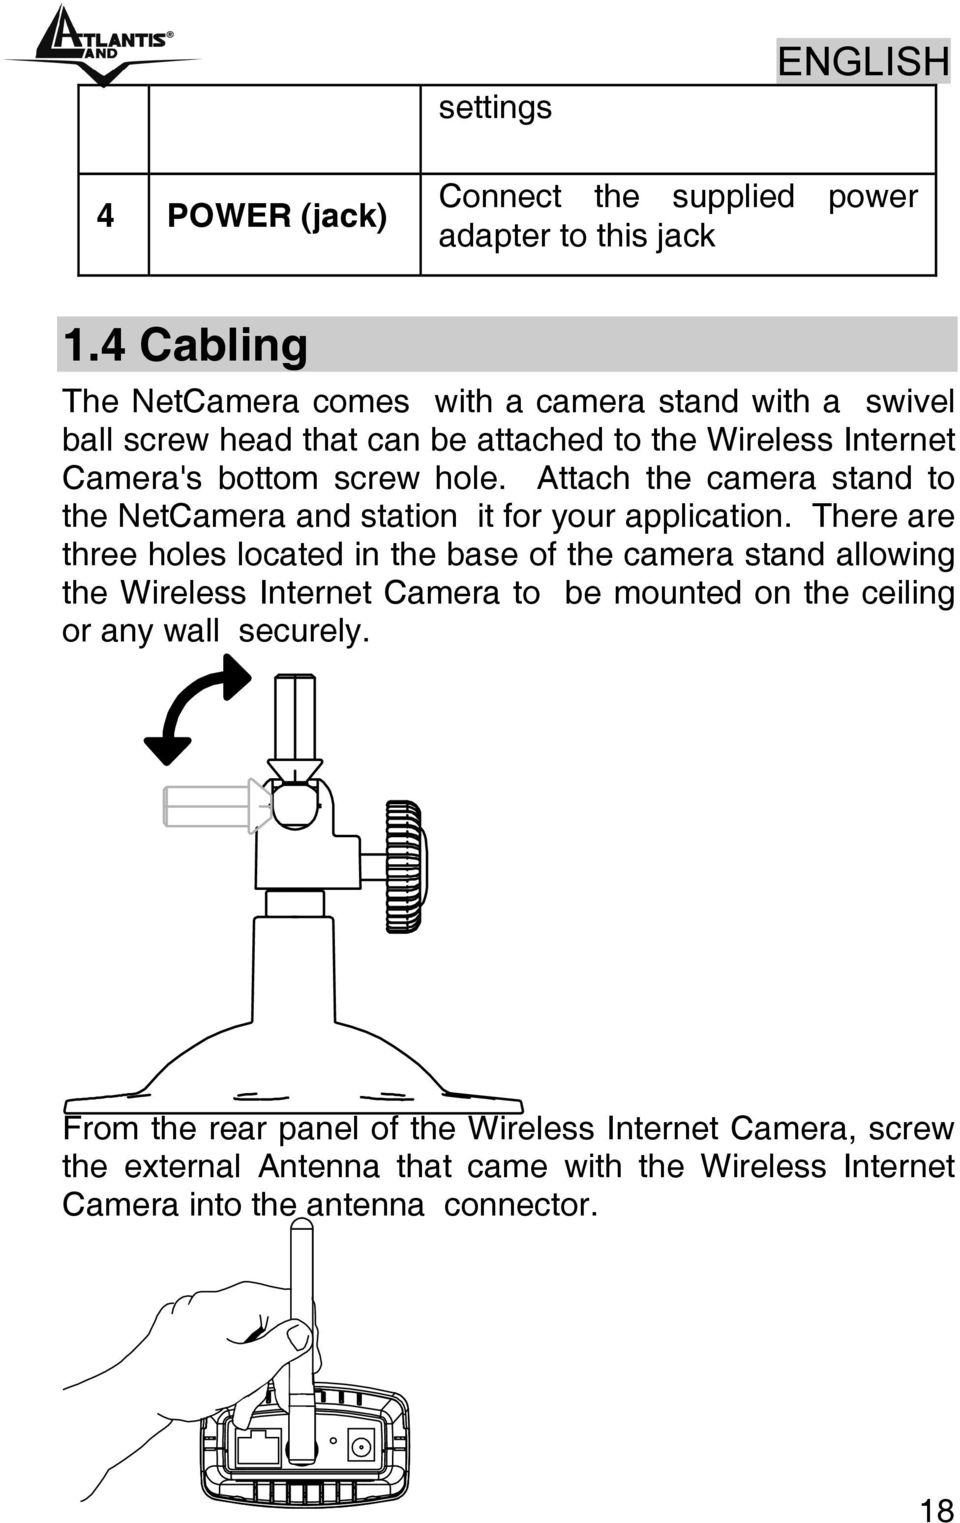 Attach the camera stand to the NetCamera and station it for your application.